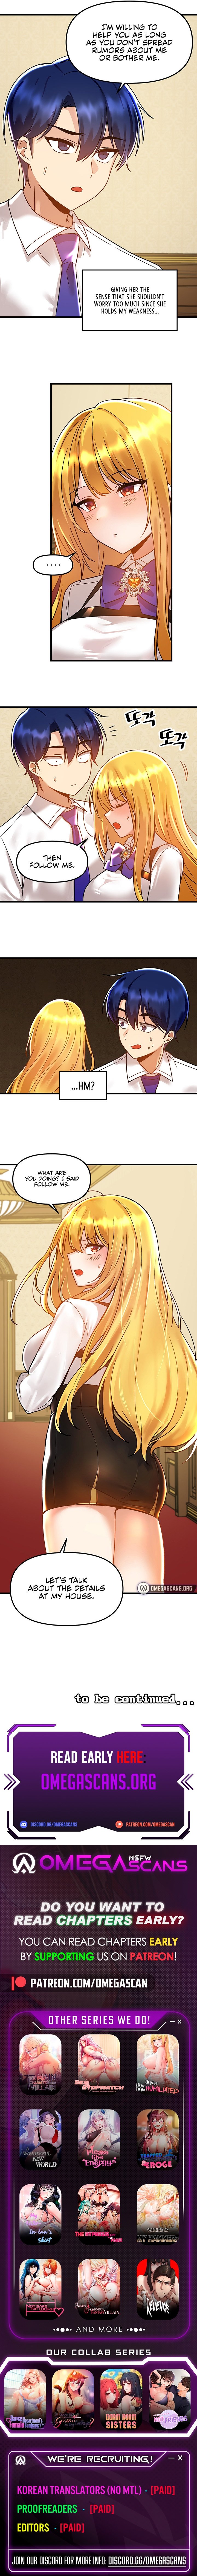 trapped-in-the-academys-eroge-chap-46-10